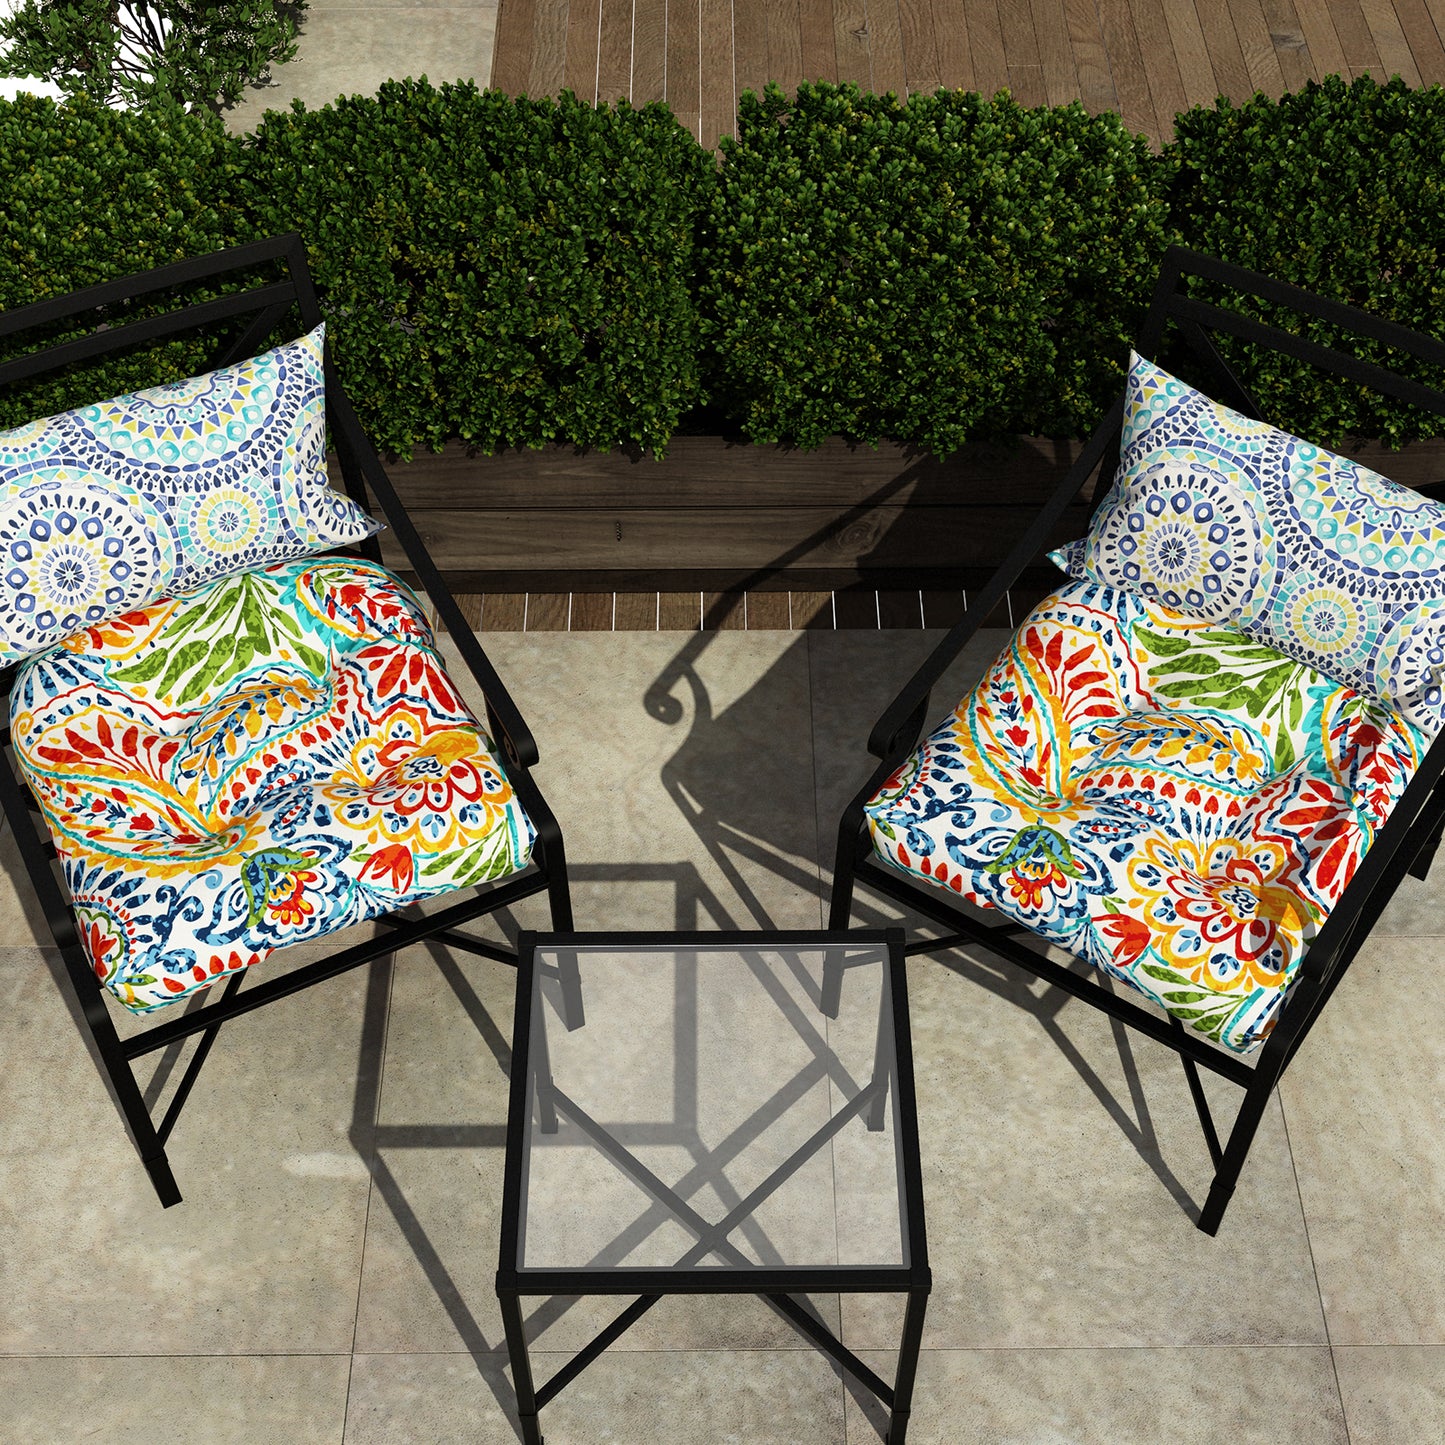 Melody Elephant Patio Wicker Chair Cushions, All Weather Outdoor Tufted Chair Pads Pack of 2, 19 x 19 x 5 Inch U-Shaped Seat Cushions of Garden Furniture Decoration, Paisley Multi